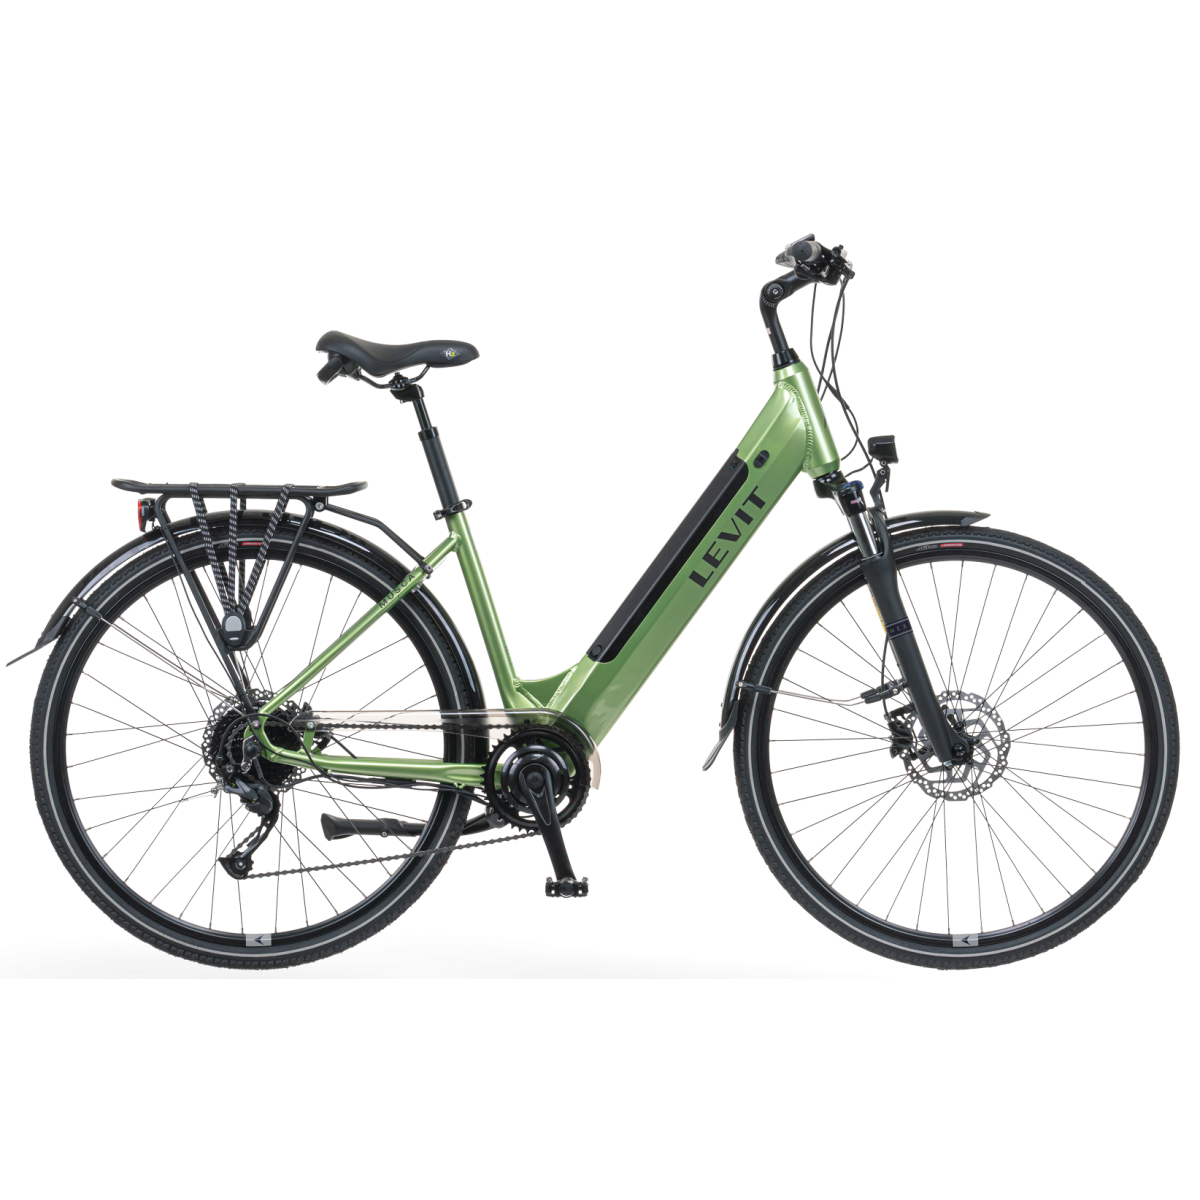 LEVIT MUSCA URBAN HD Lowstep 468 Wh electric bicycle - Olive pearl